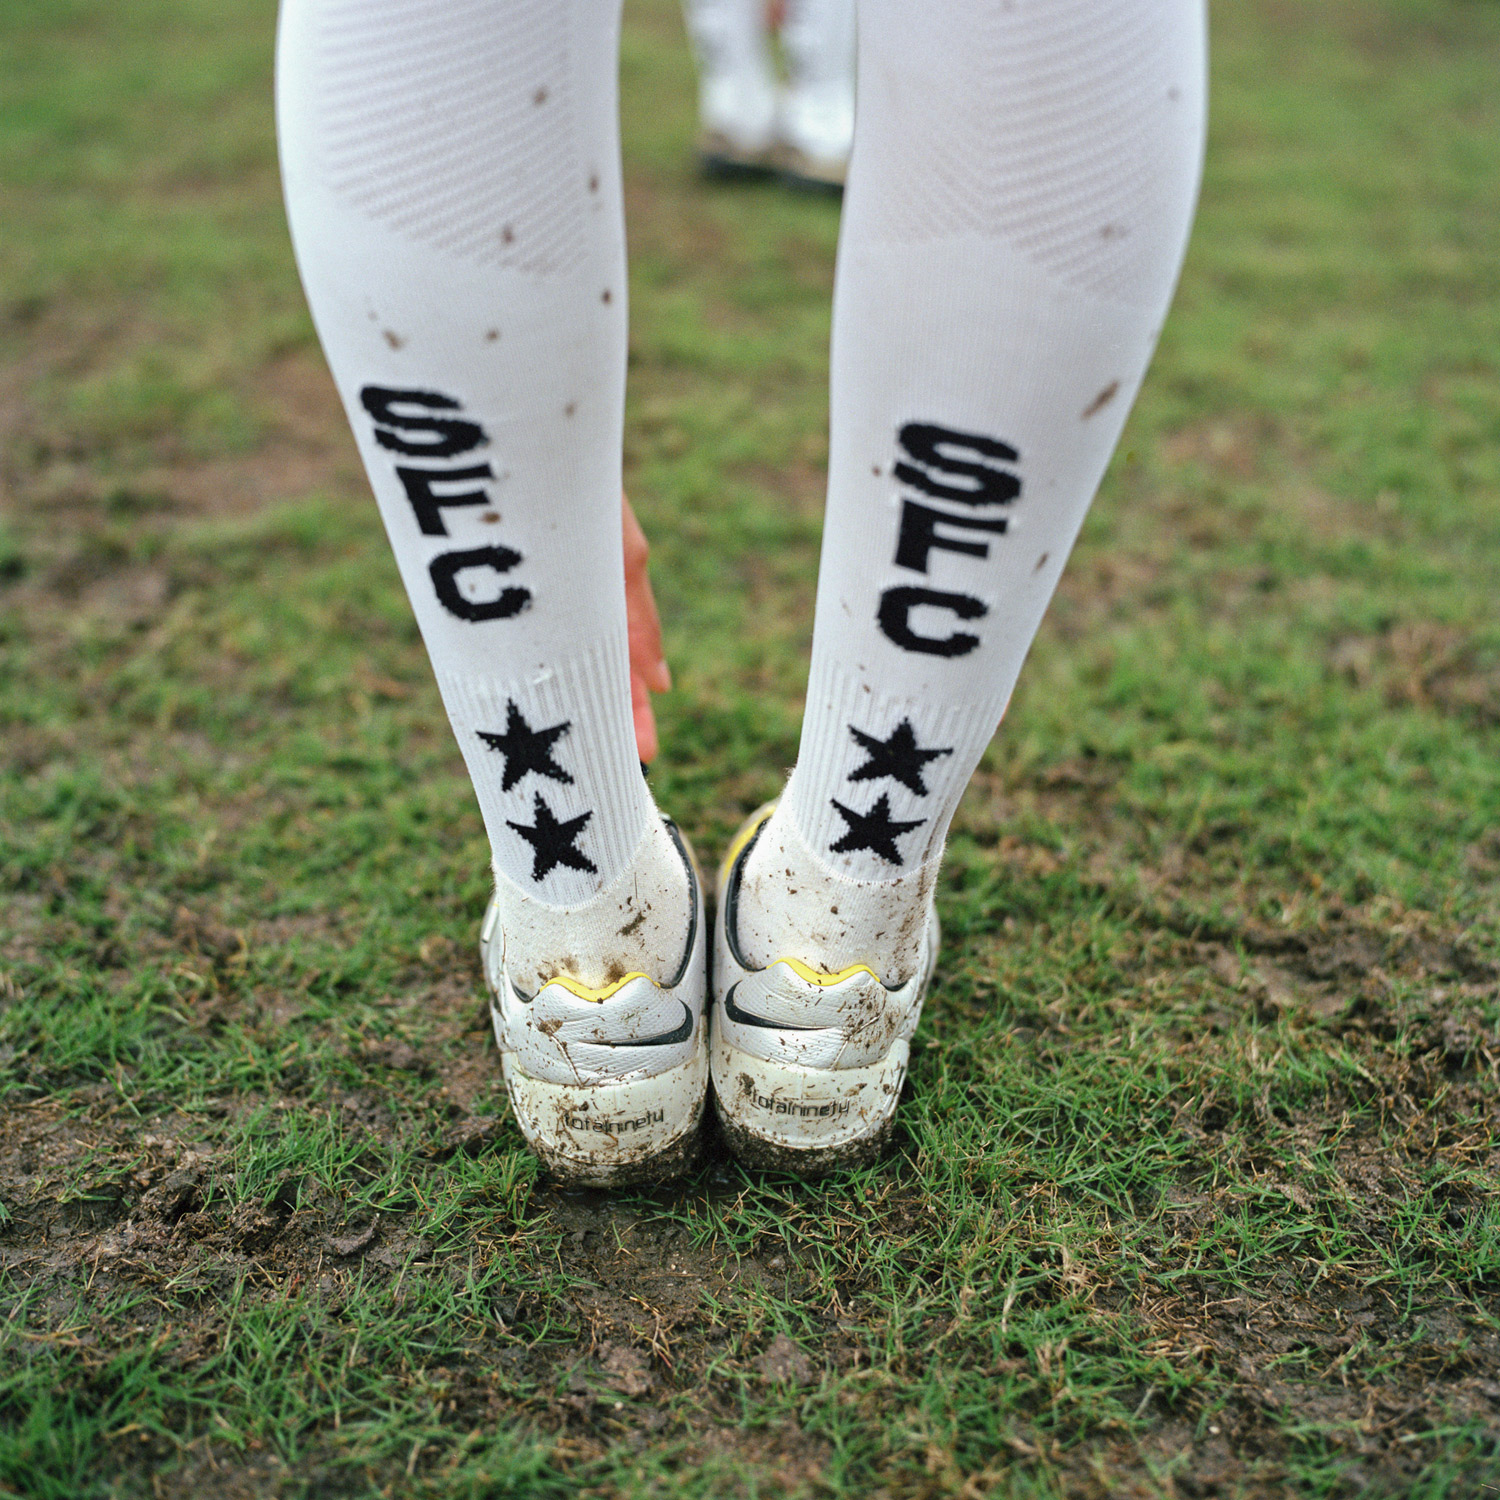 Detail of Santos Futebol Clube (SFC) socks during a team stretch at training.  All of the women on the team are now provided with washed uniform kits for every practice and game similar to the men’s teams.  In the past, the women on the team were responsible for washing their own uniform kits by hand. (October 29, 2010)